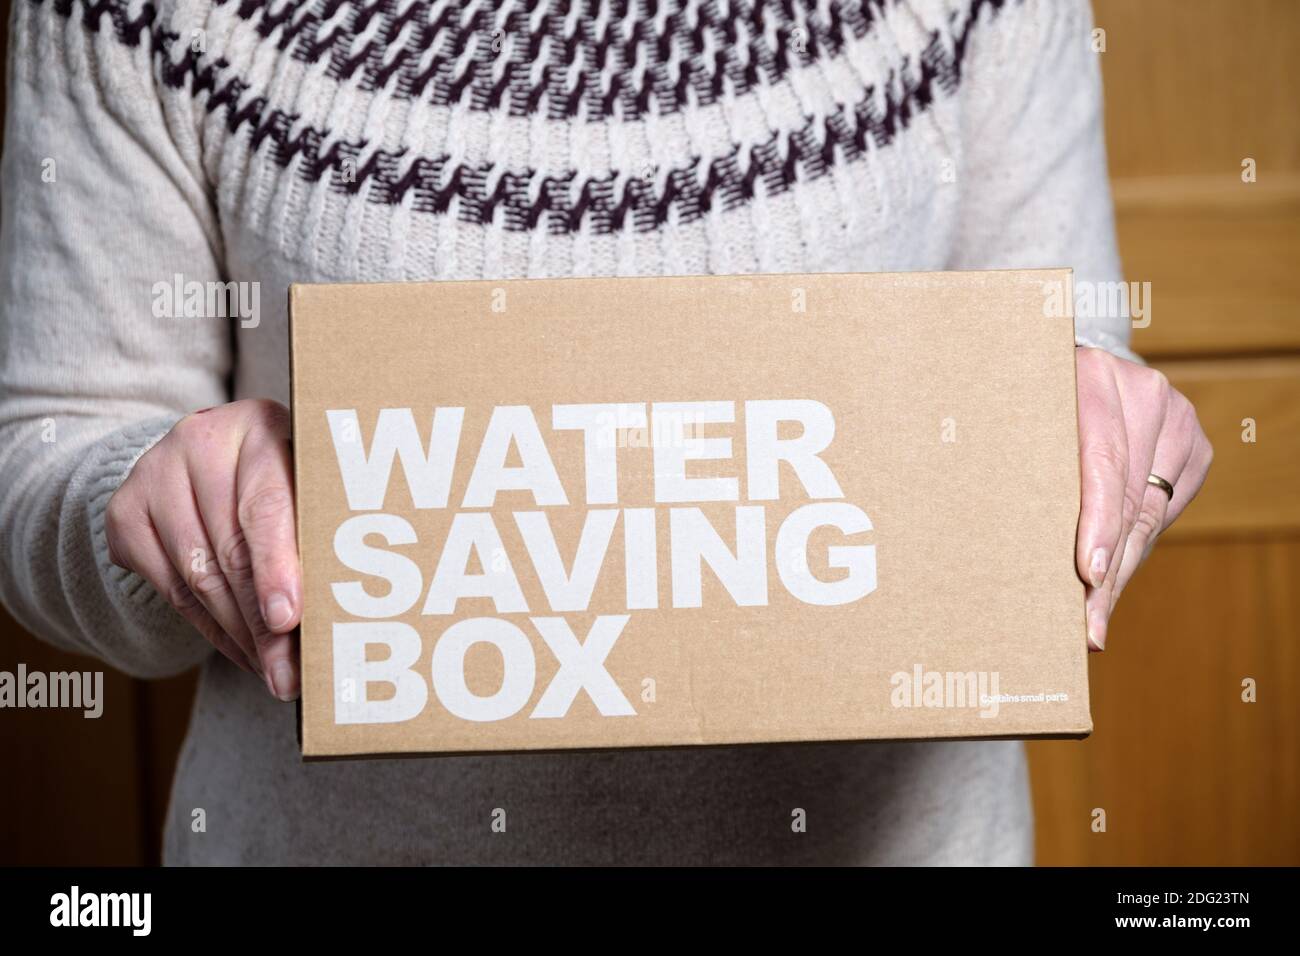 A customer is shown holding a box containing water saving pack supplied by a consumers local water authority. The box contains water saving devices Stock Photo